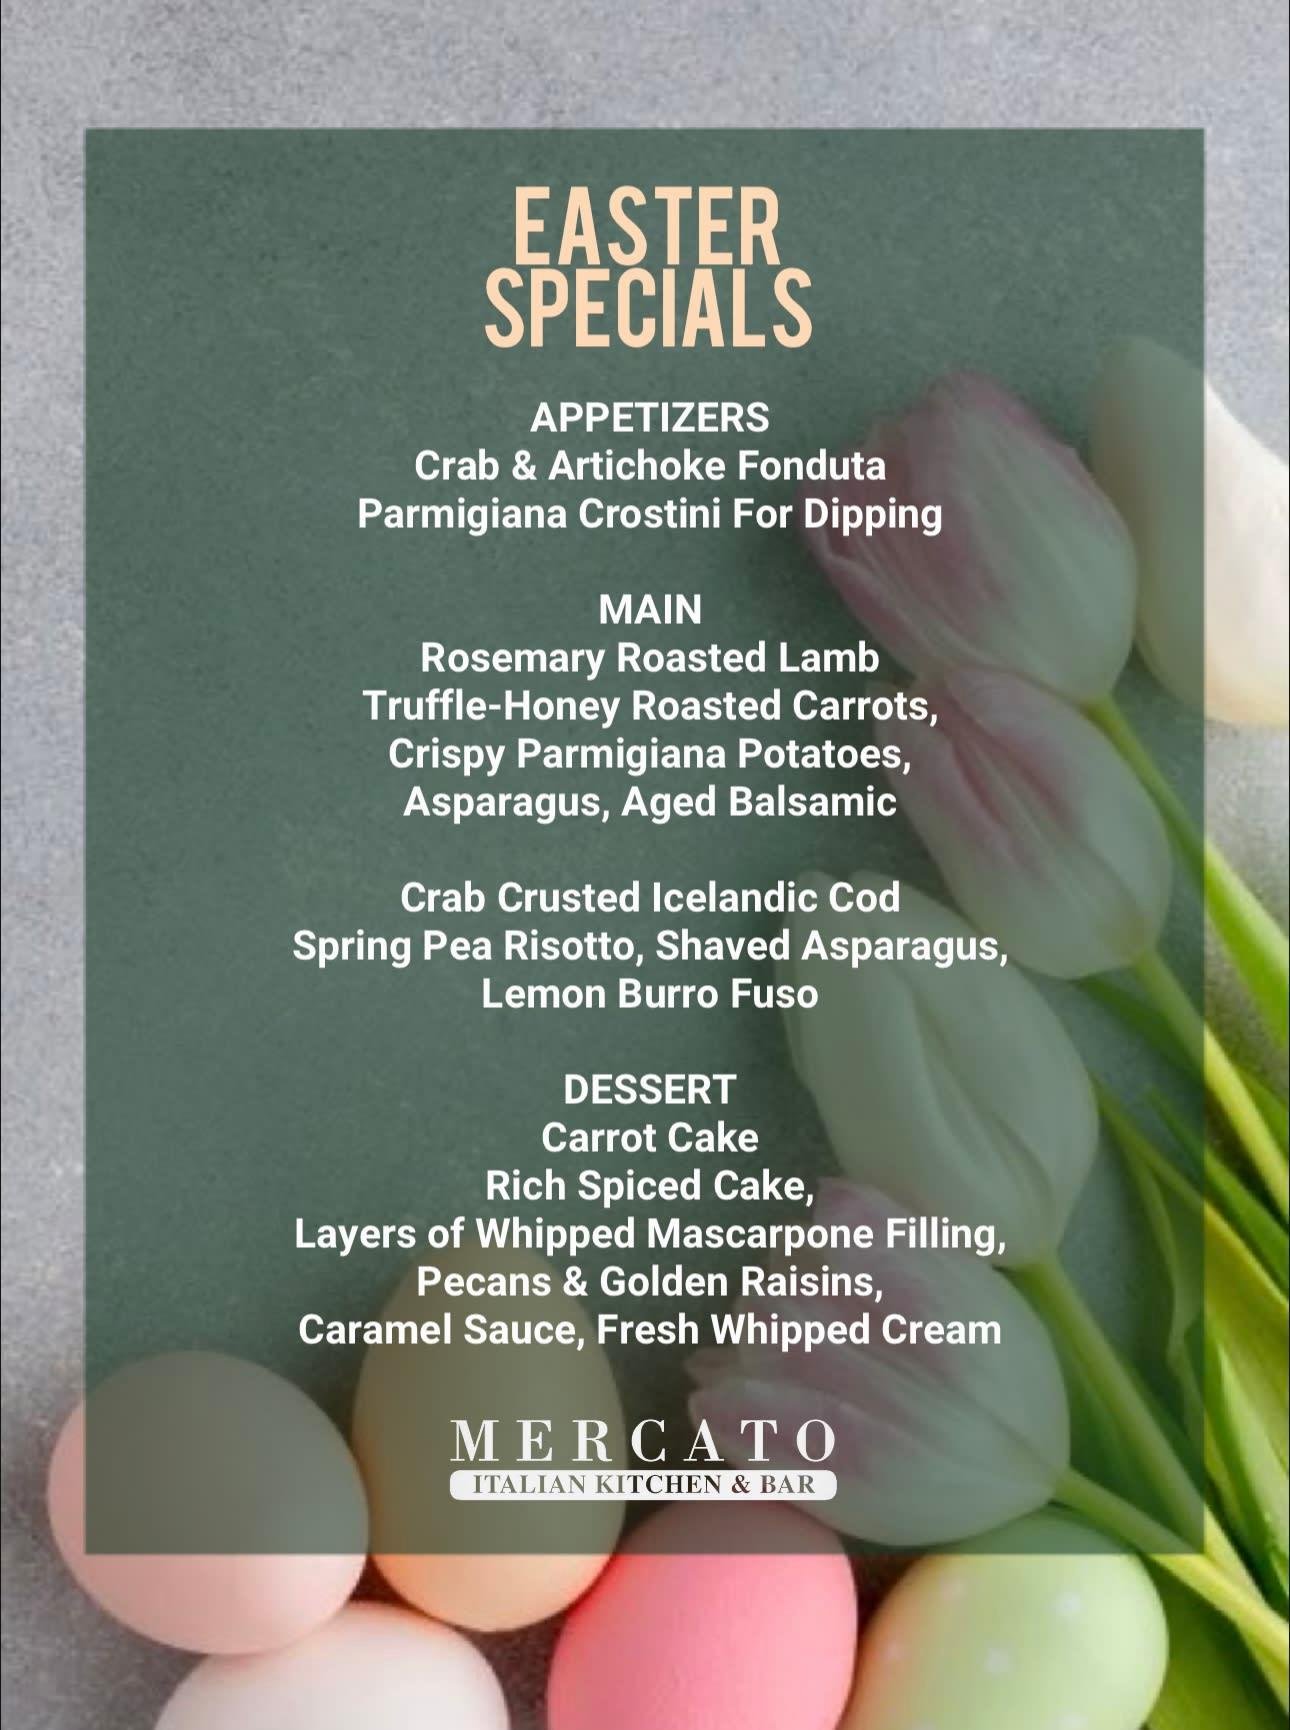 Hop On Over For Egg-citing Easter Specials! 🥂 🐰🌷

Just A Few Weeks Away, Be Sure To Make Your Reservations!